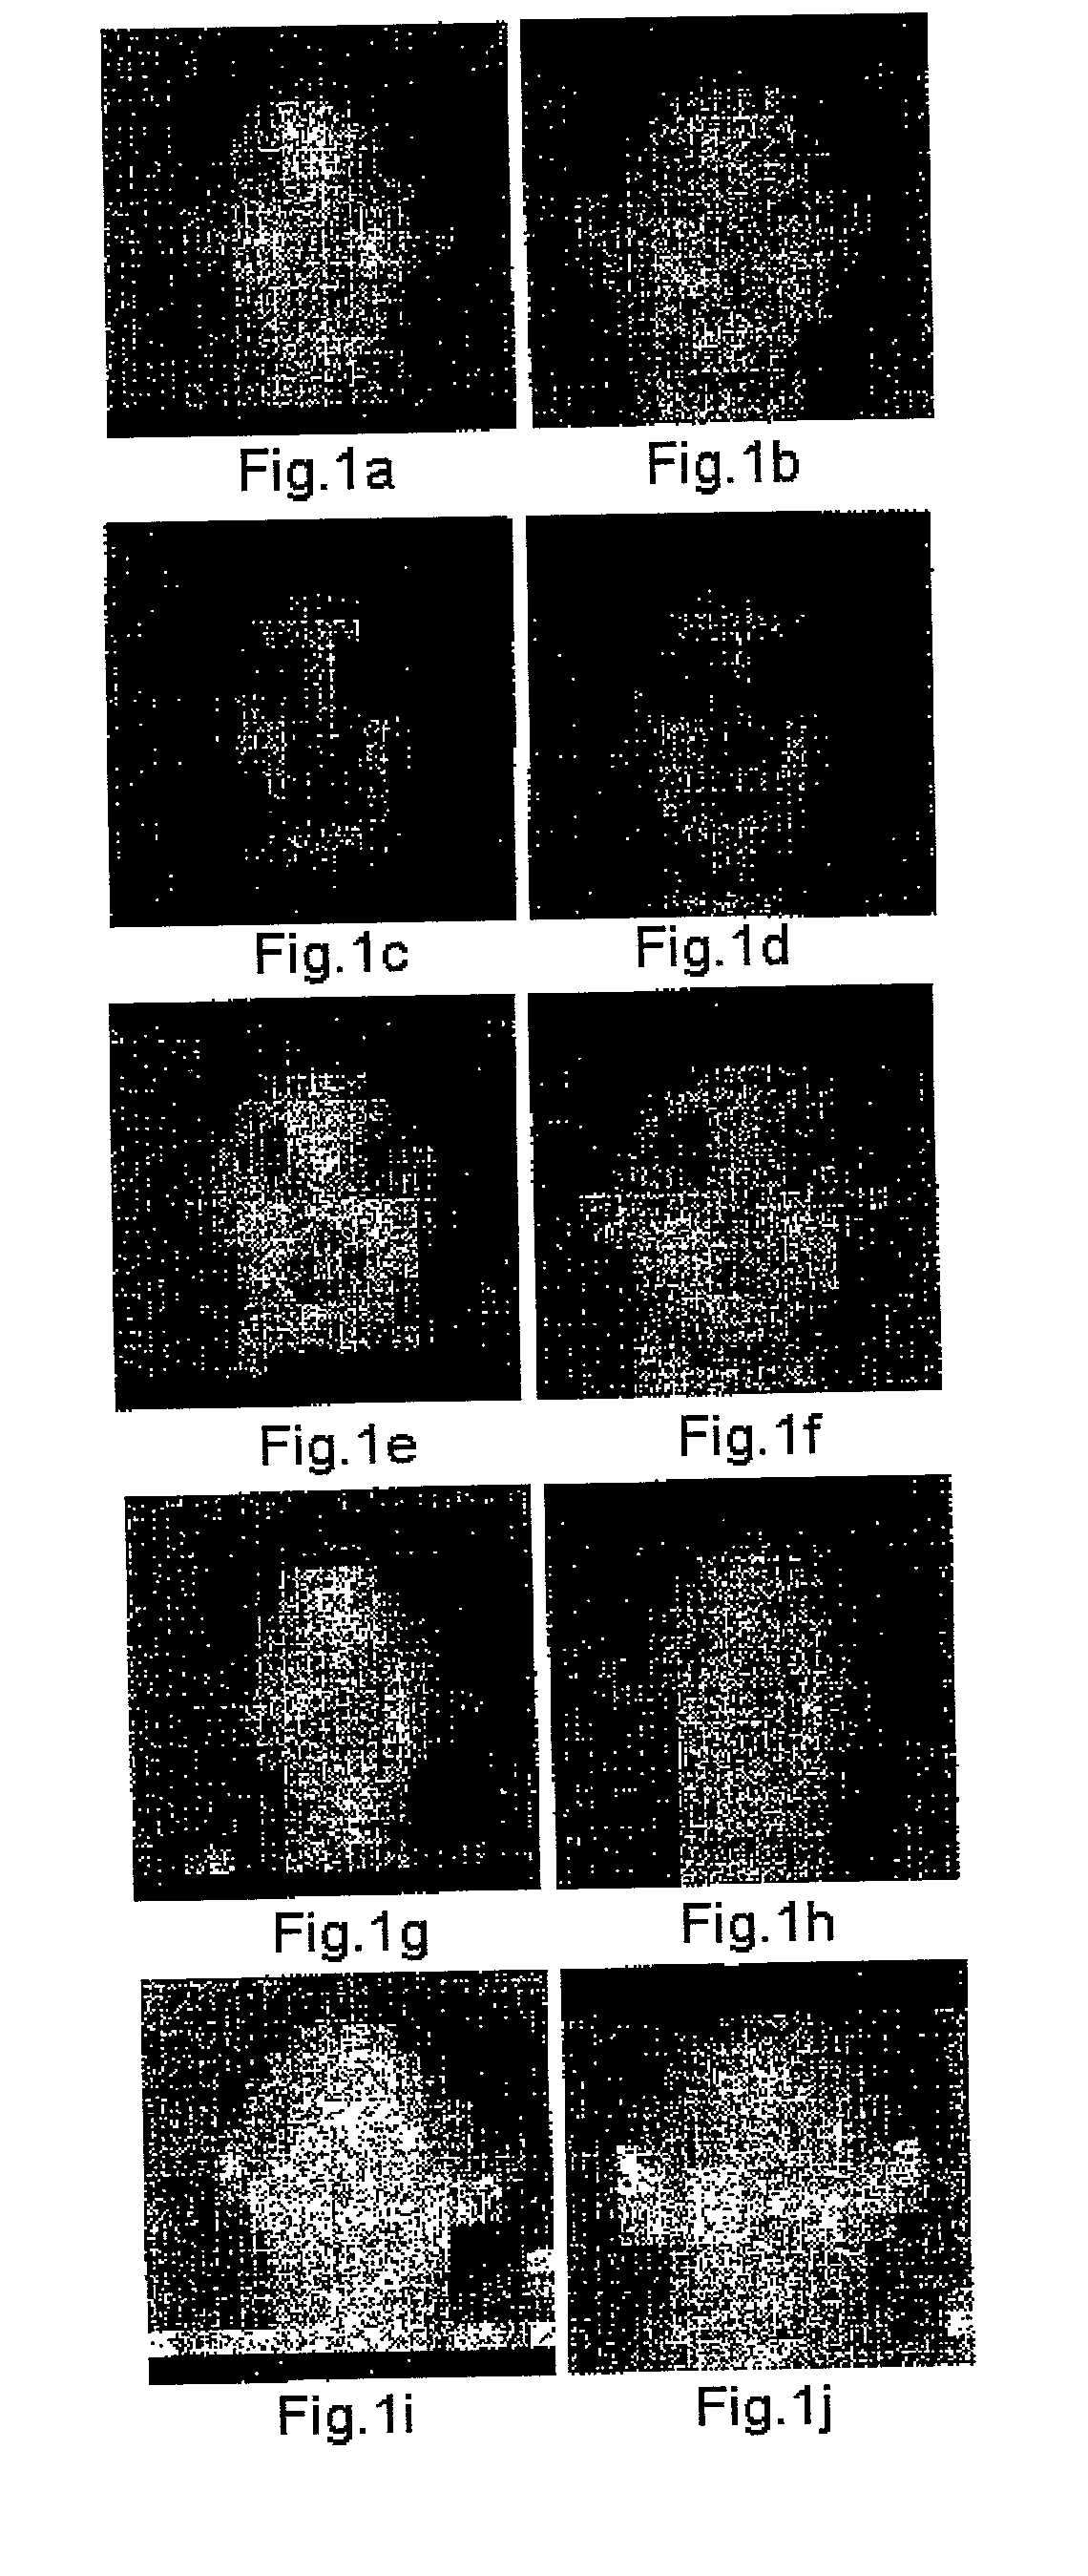 Image coding method and apparatus and image decoding method and apparatus